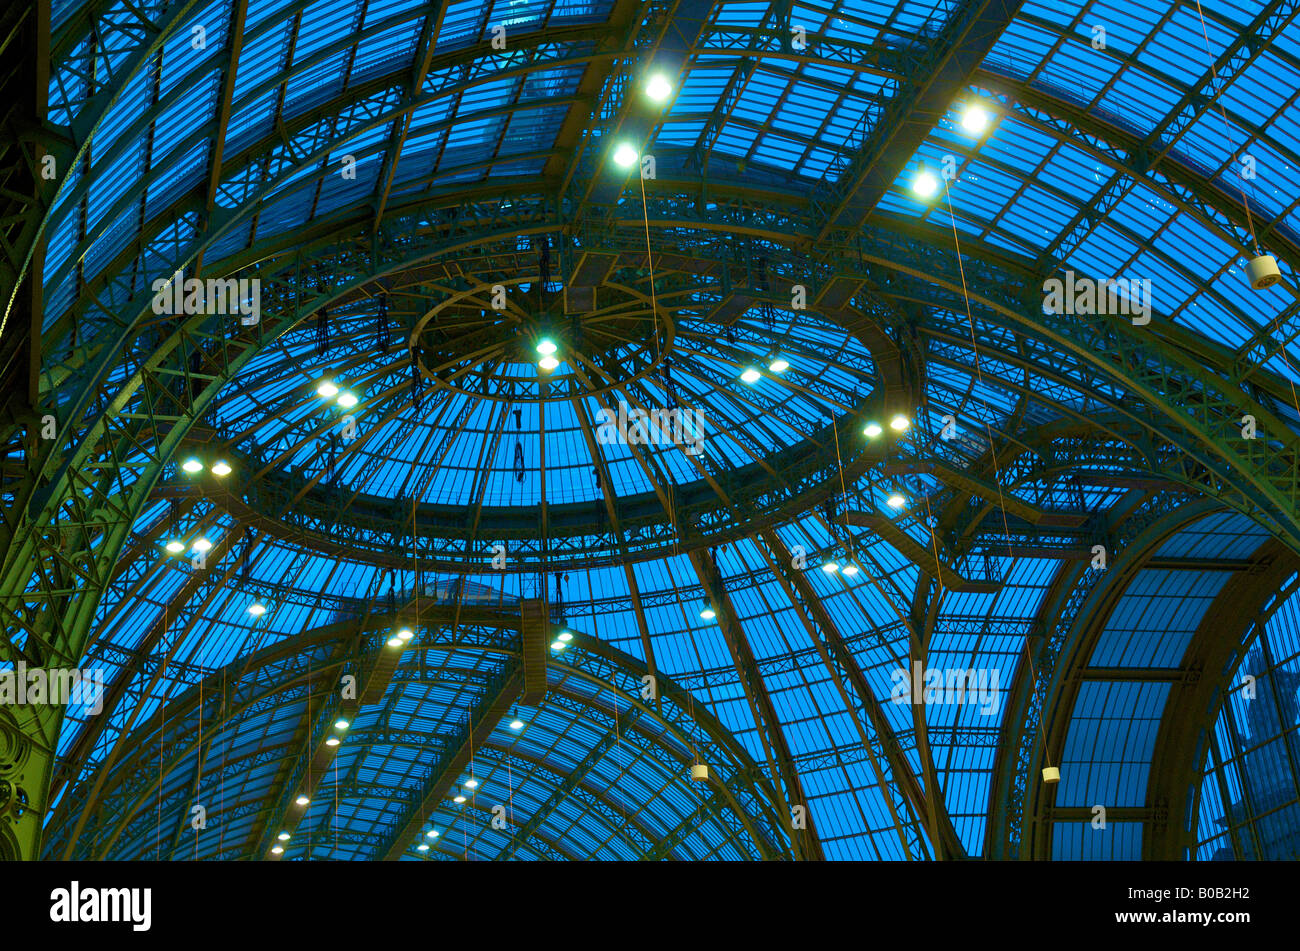 Paris France Grand Palais Glass Roof High Resolution Stock Photography and  Images - Alamy